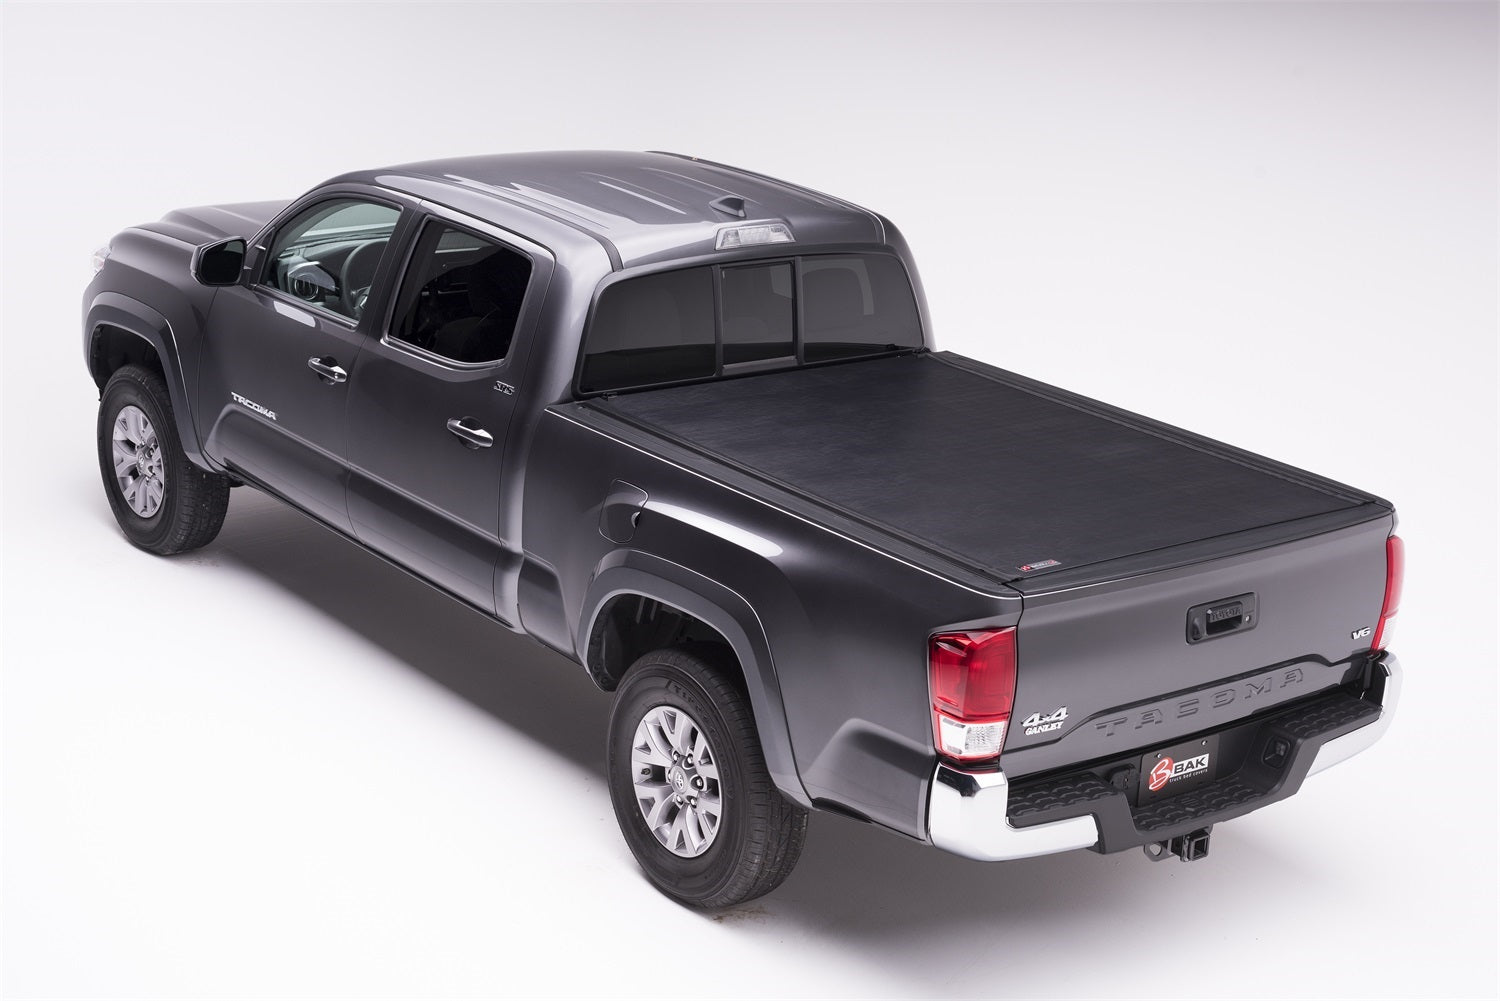 BAK Industries 39406 Revolver X2 Hard Rolling Truck Bed Cover Fits 05-15 Tacoma